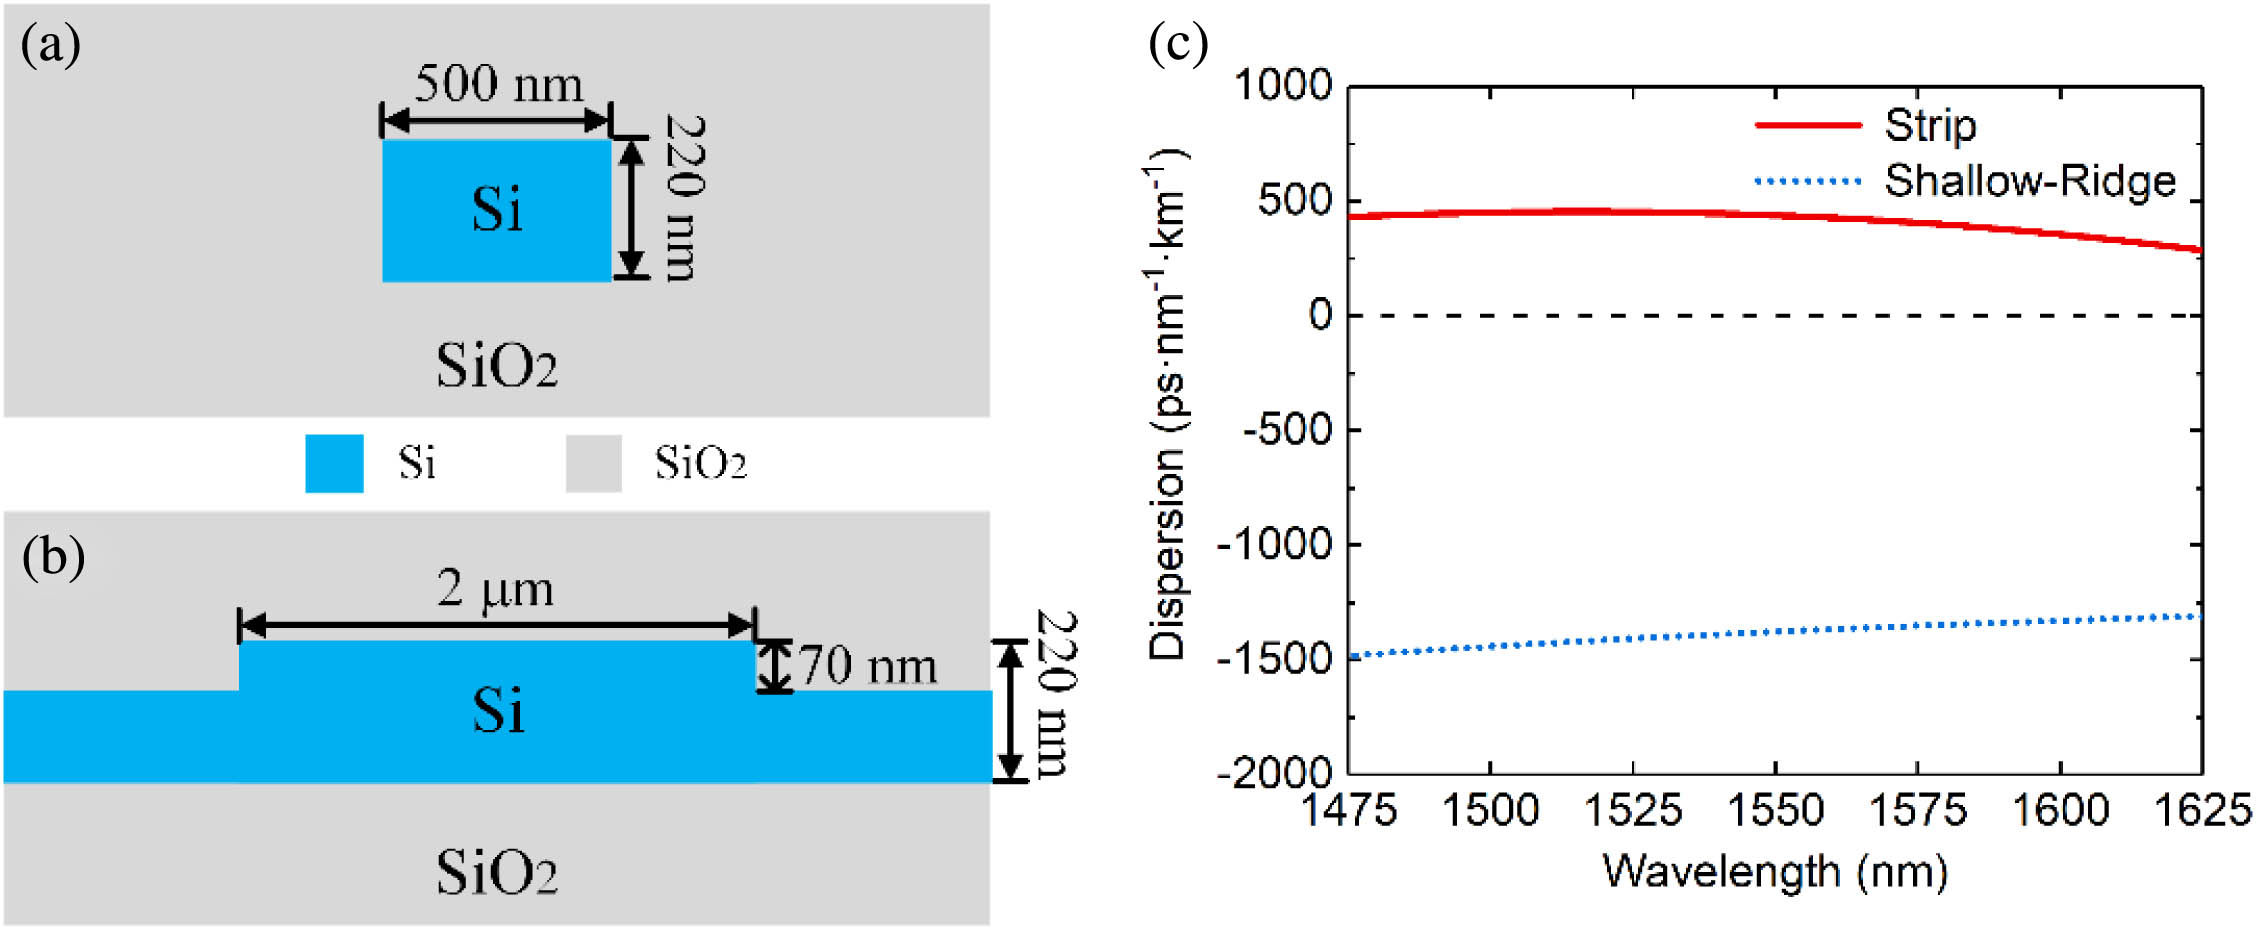 Typical structures of (a) a strip waveguide and (b) a shallow-ridge waveguide, with waveguide parameters close to the fabricated samples in the experiment; (c) the calculated dispersions of the two waveguides in the telecom band. The strip waveguide has small anomalous dispersion, while the shallow-ridge waveguide has large normal dispersion.